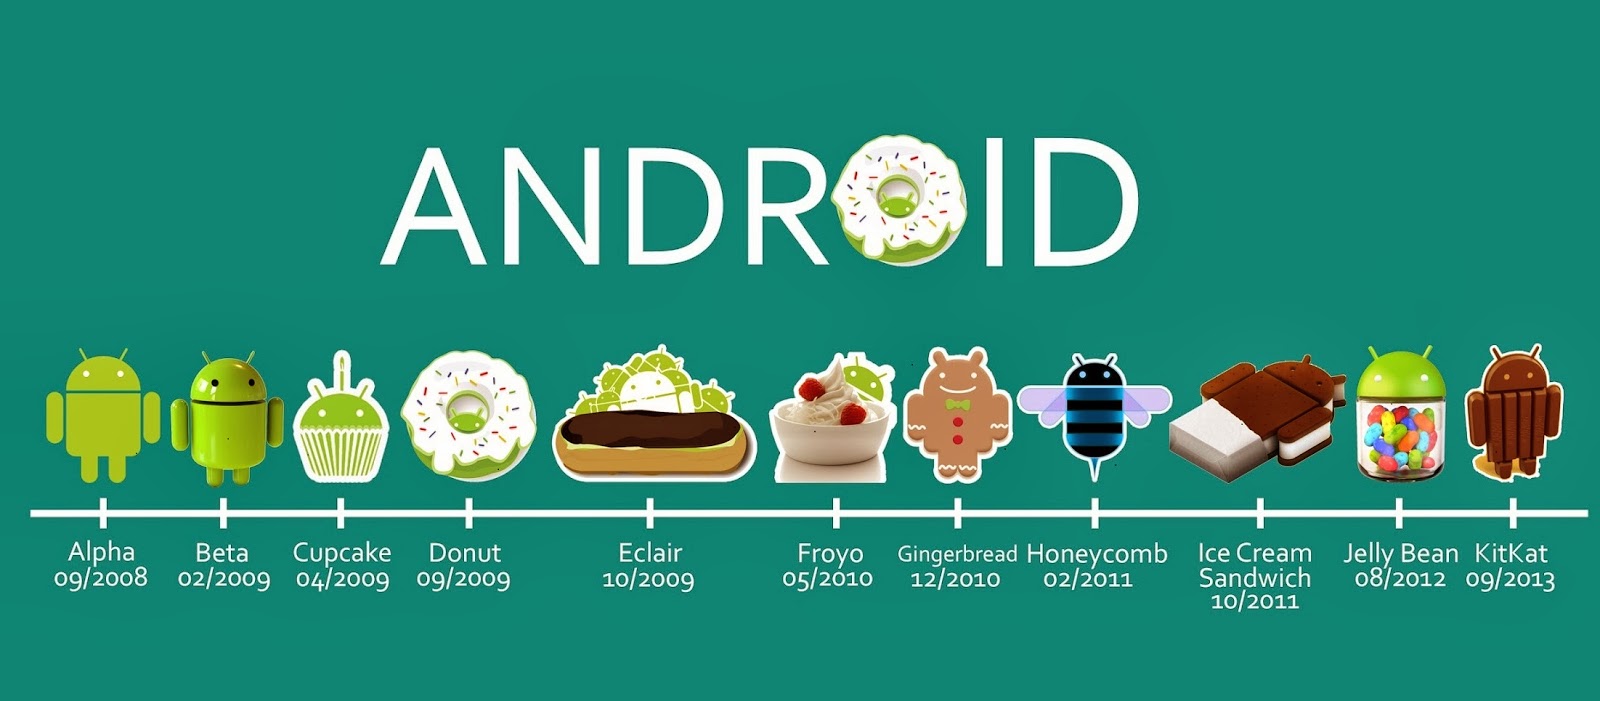 Android all names